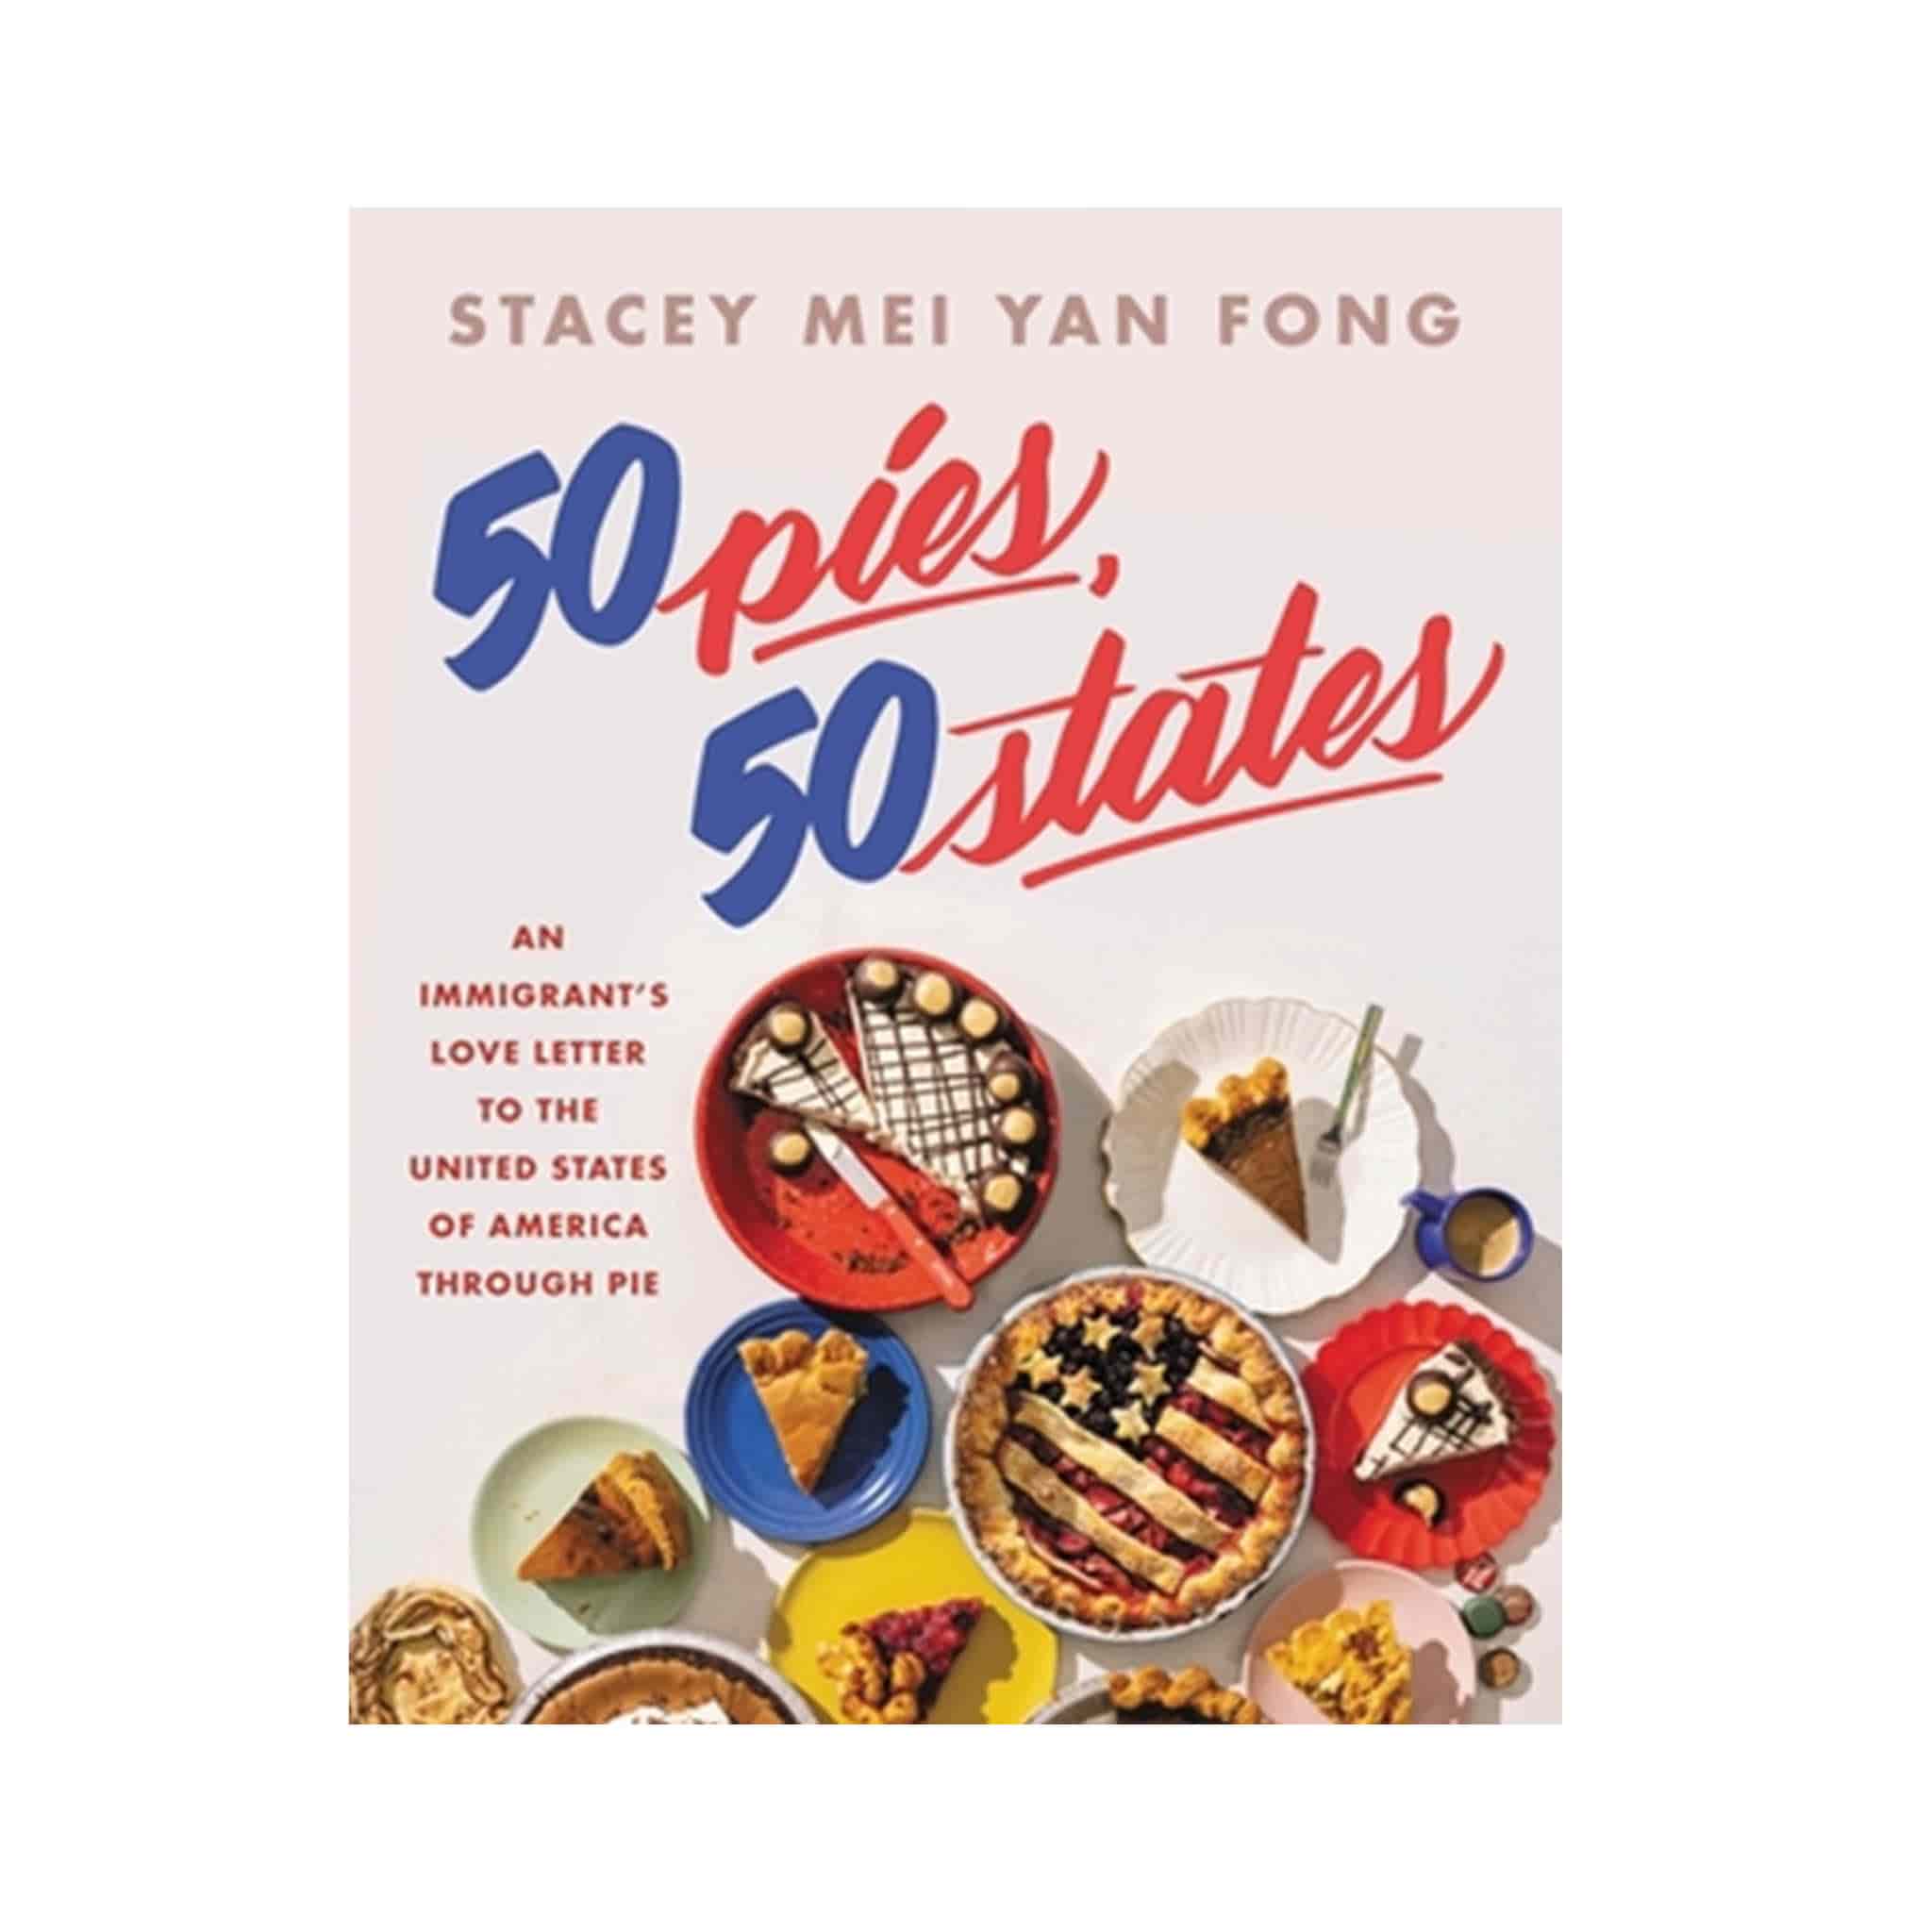 50 Pies, 50 States, by Stacey Mei Yan Fong